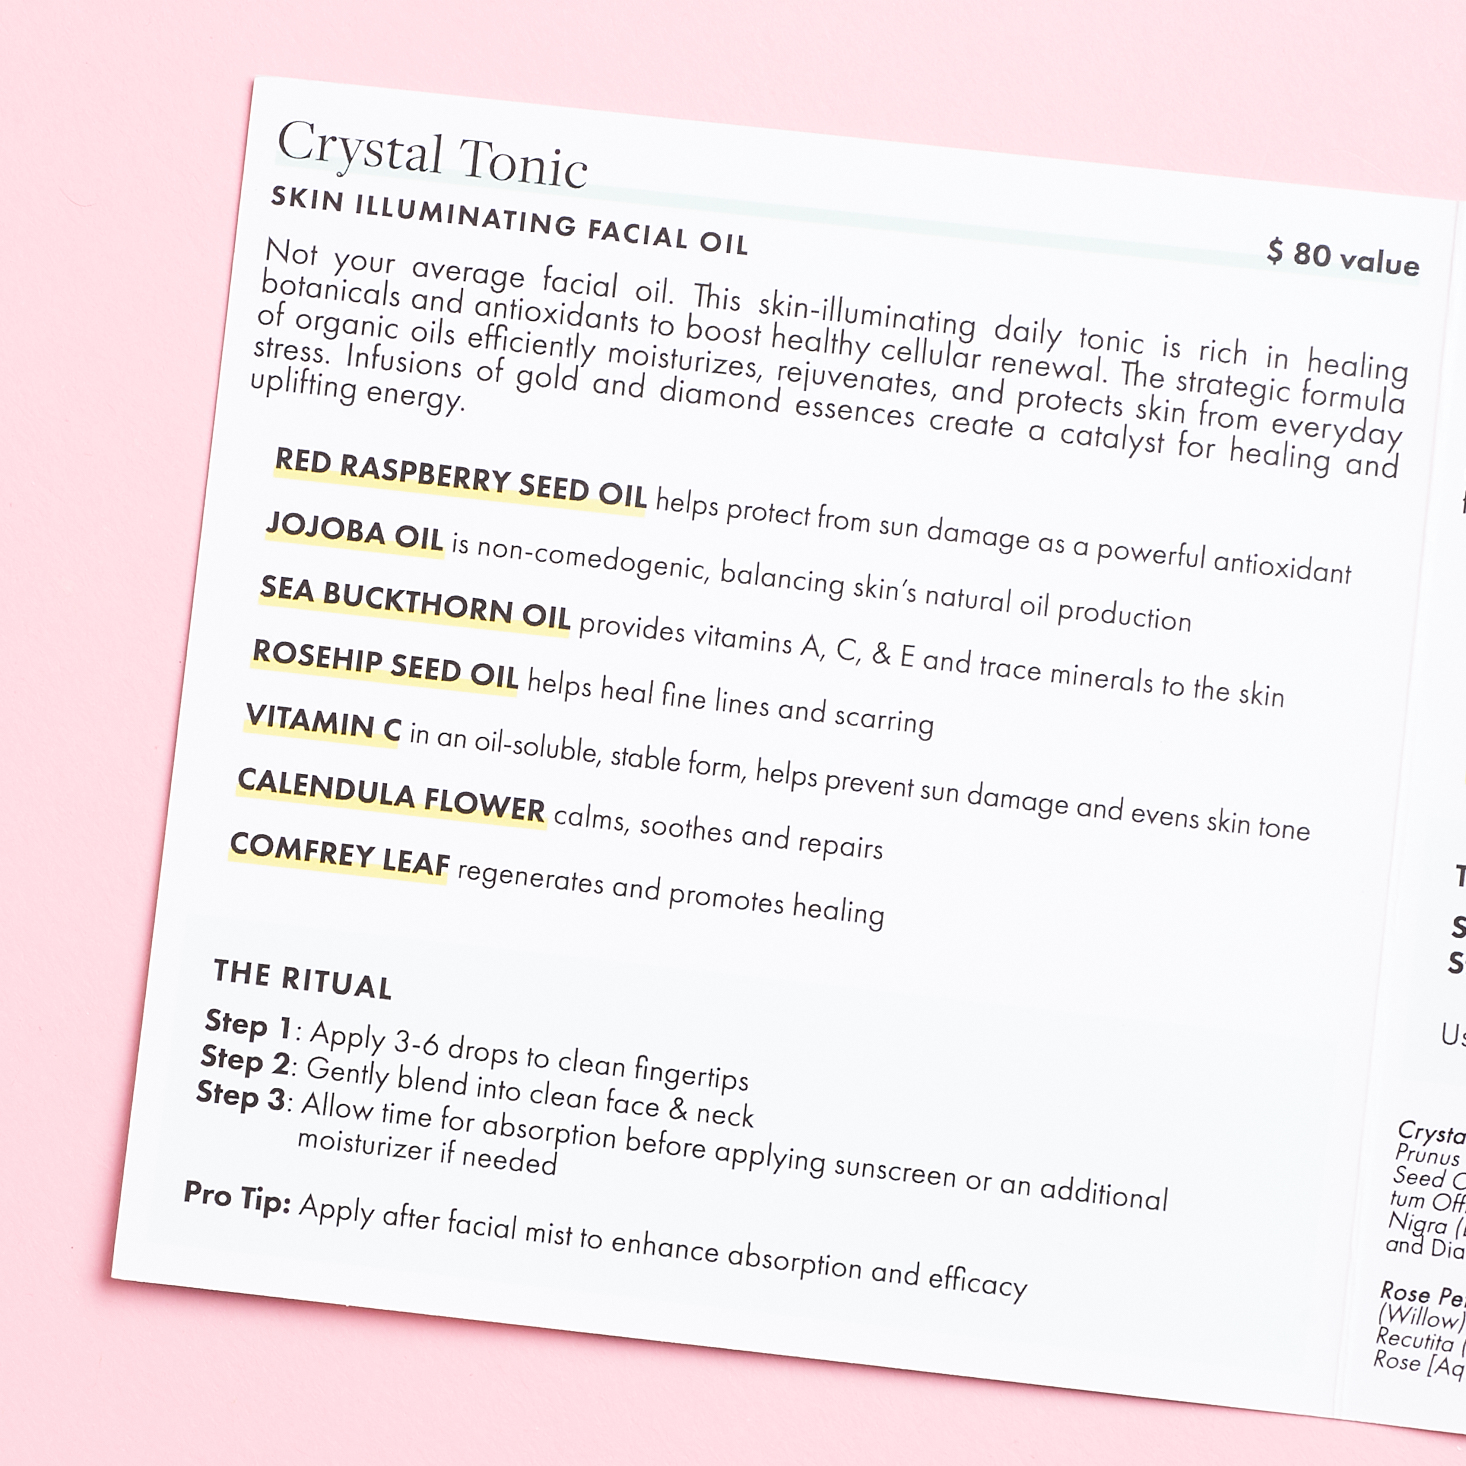 info for pink light crystal tonic